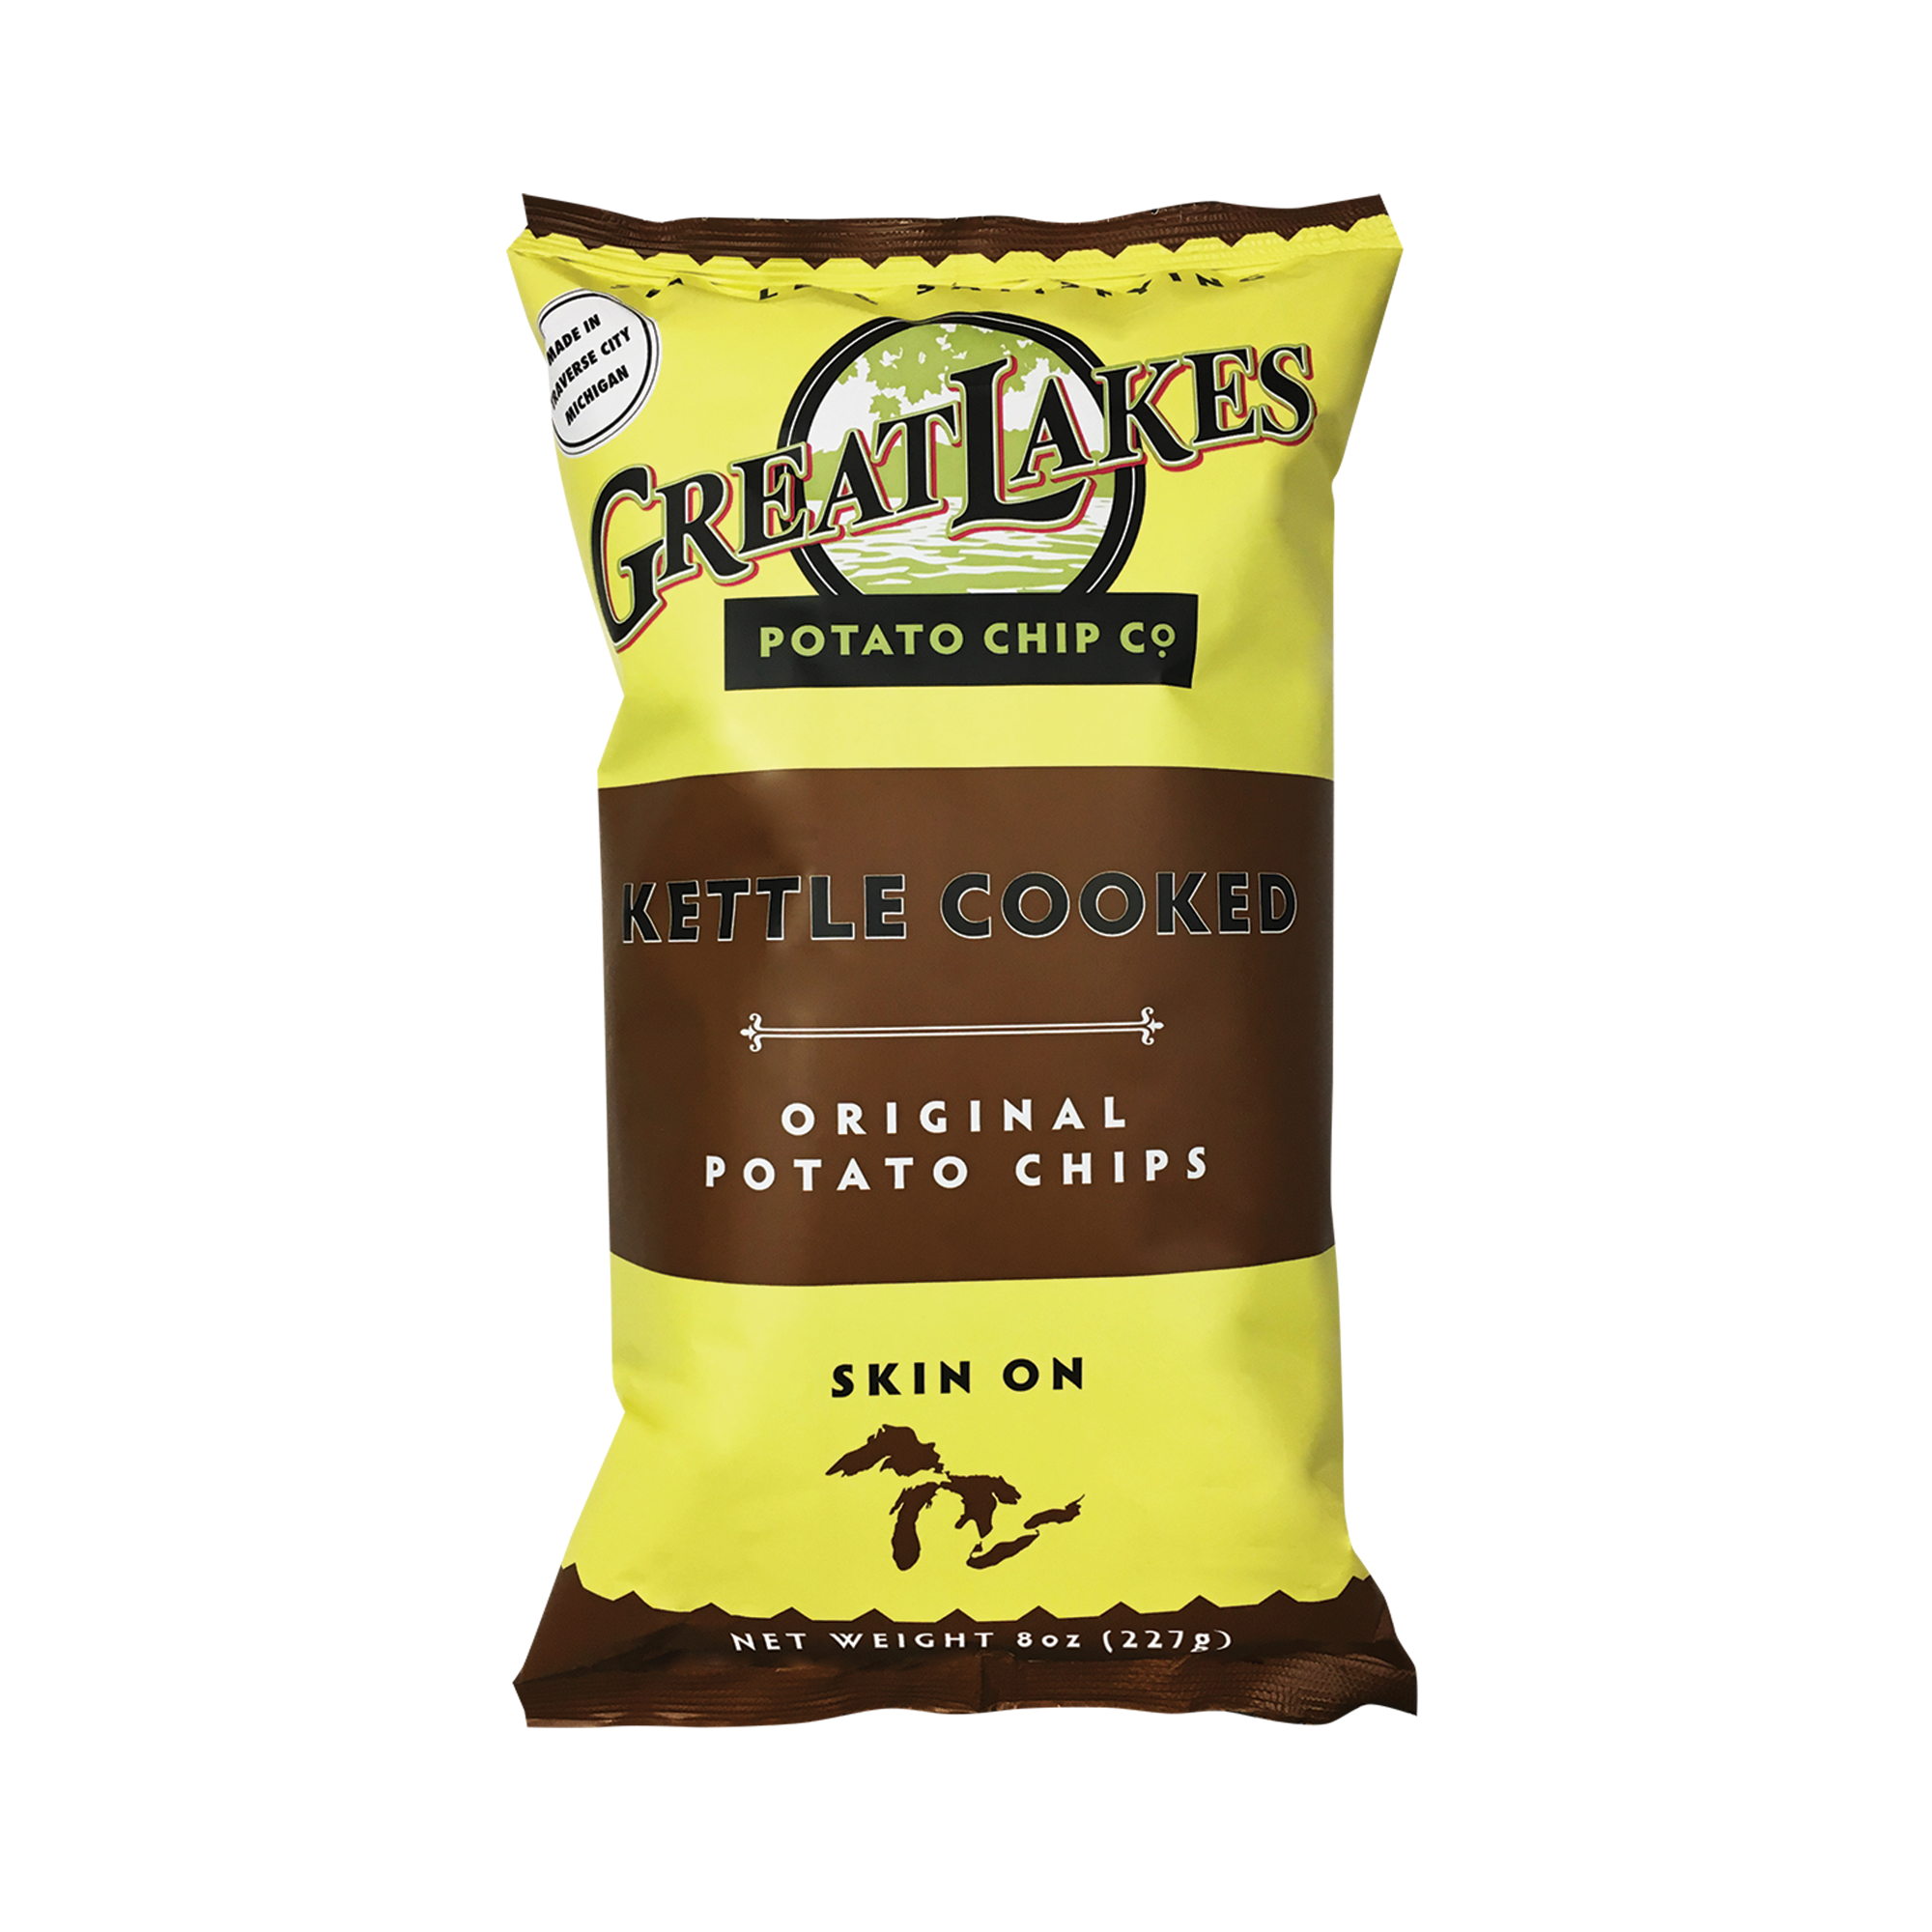 Great Lakes Potato Chips Kettle Cooked Original - 8 Oz